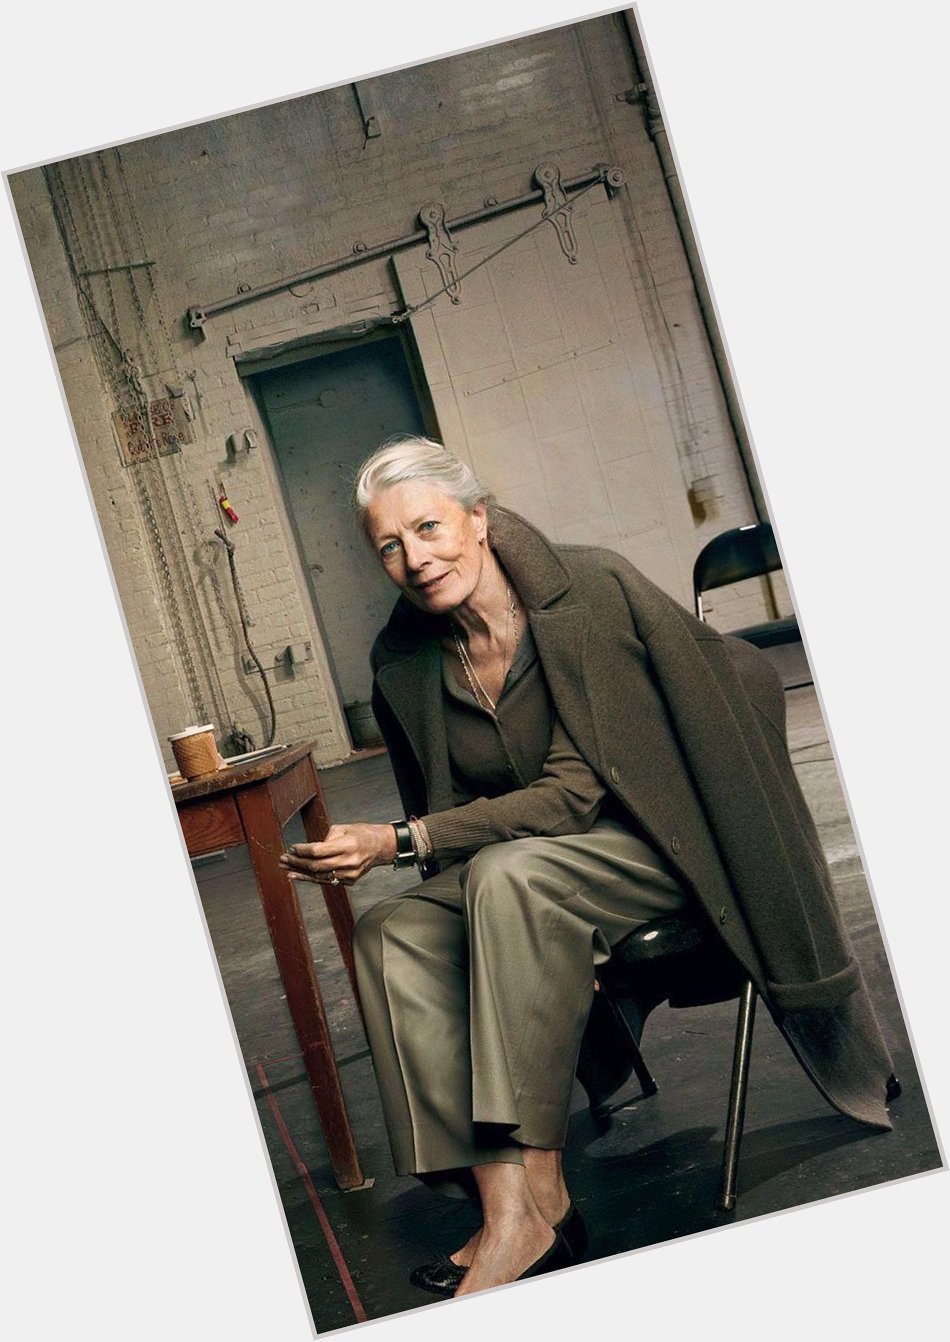  Just being alive, staying human, I think that\s infinitely precious. Vanessa Redgrave
Happy birthday! 